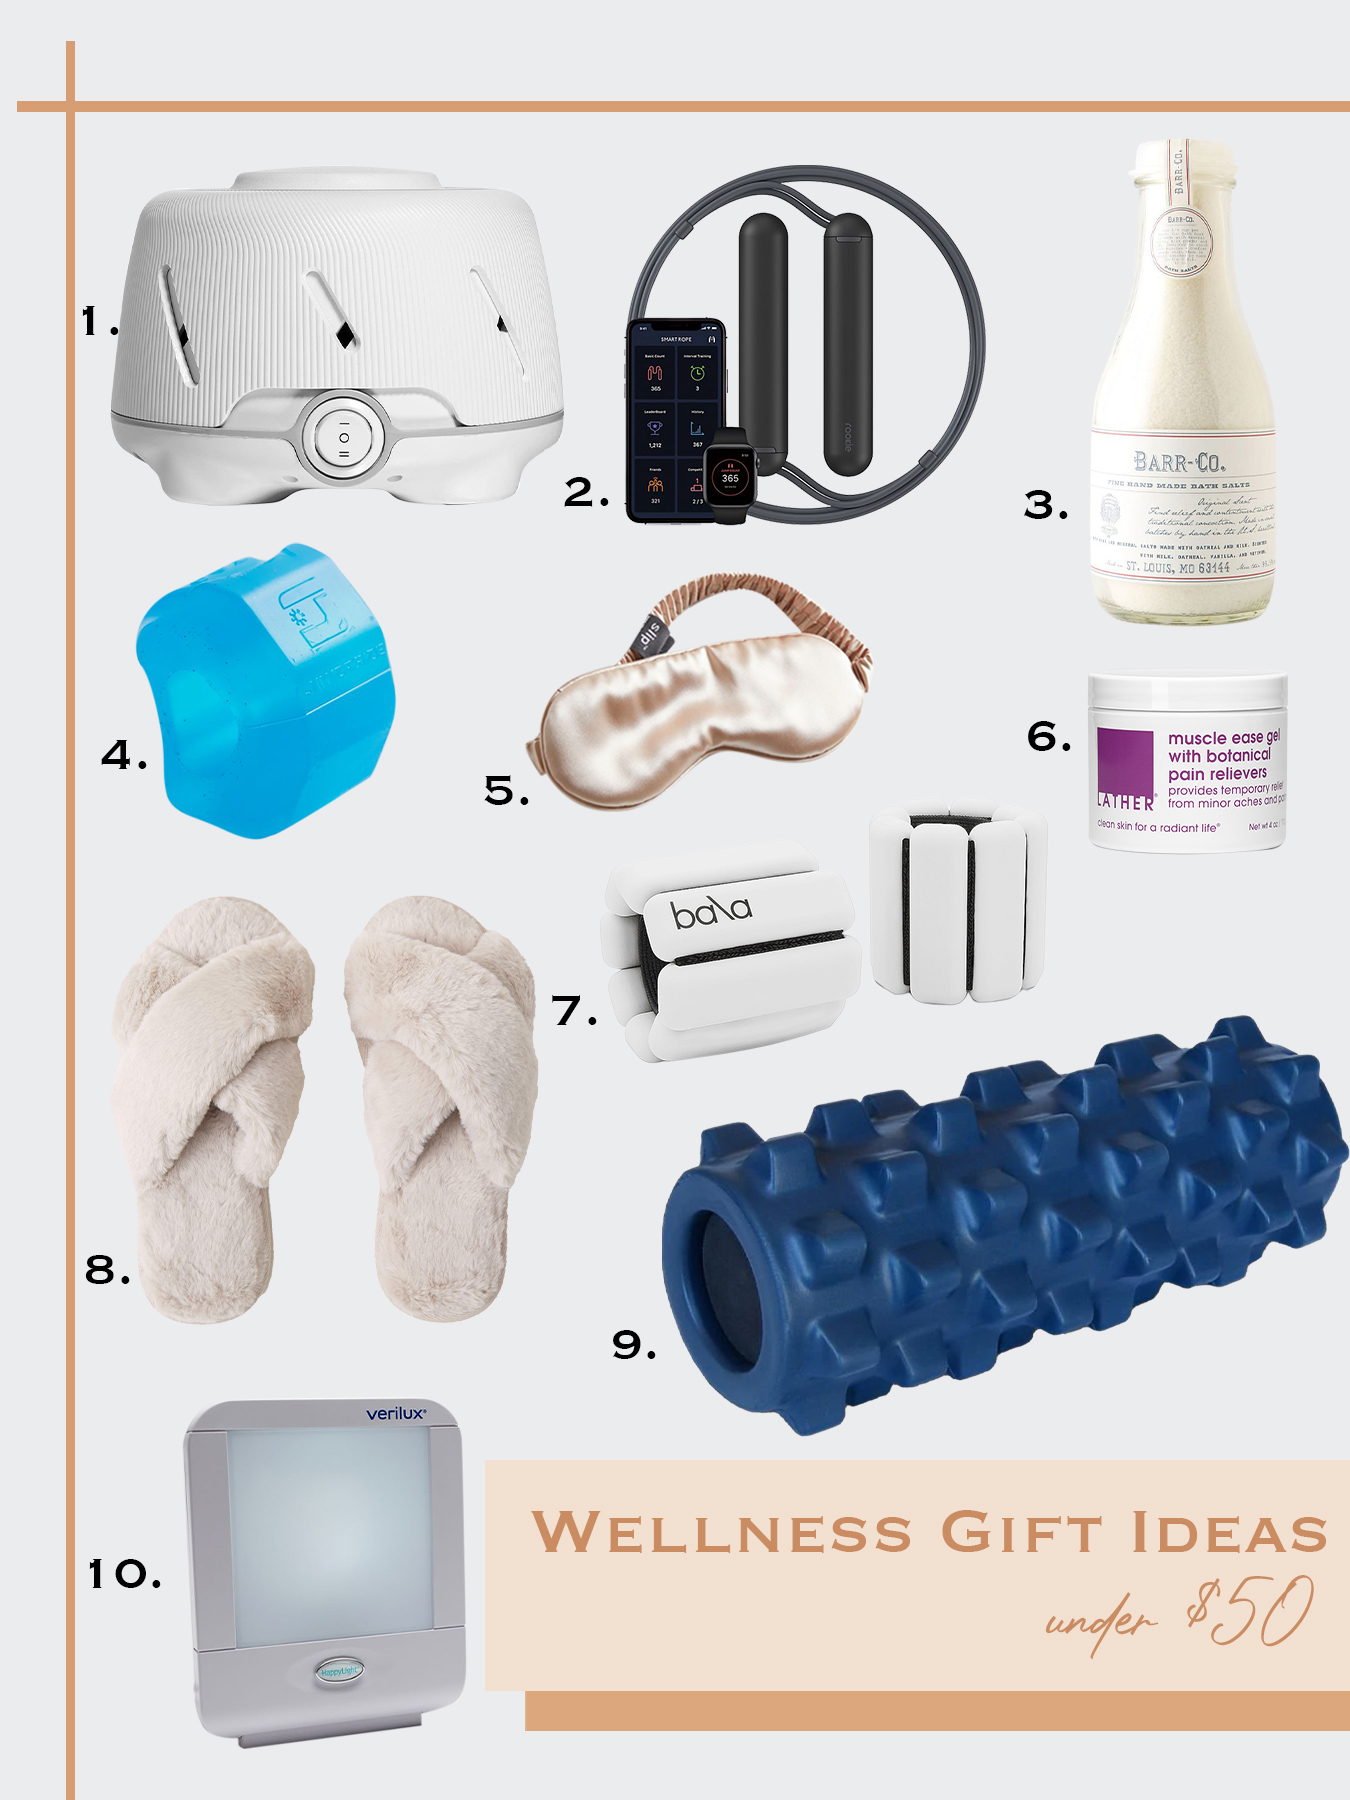 30 Wellness Gift Ideas For Any Budget - Tea Cups & Tulips